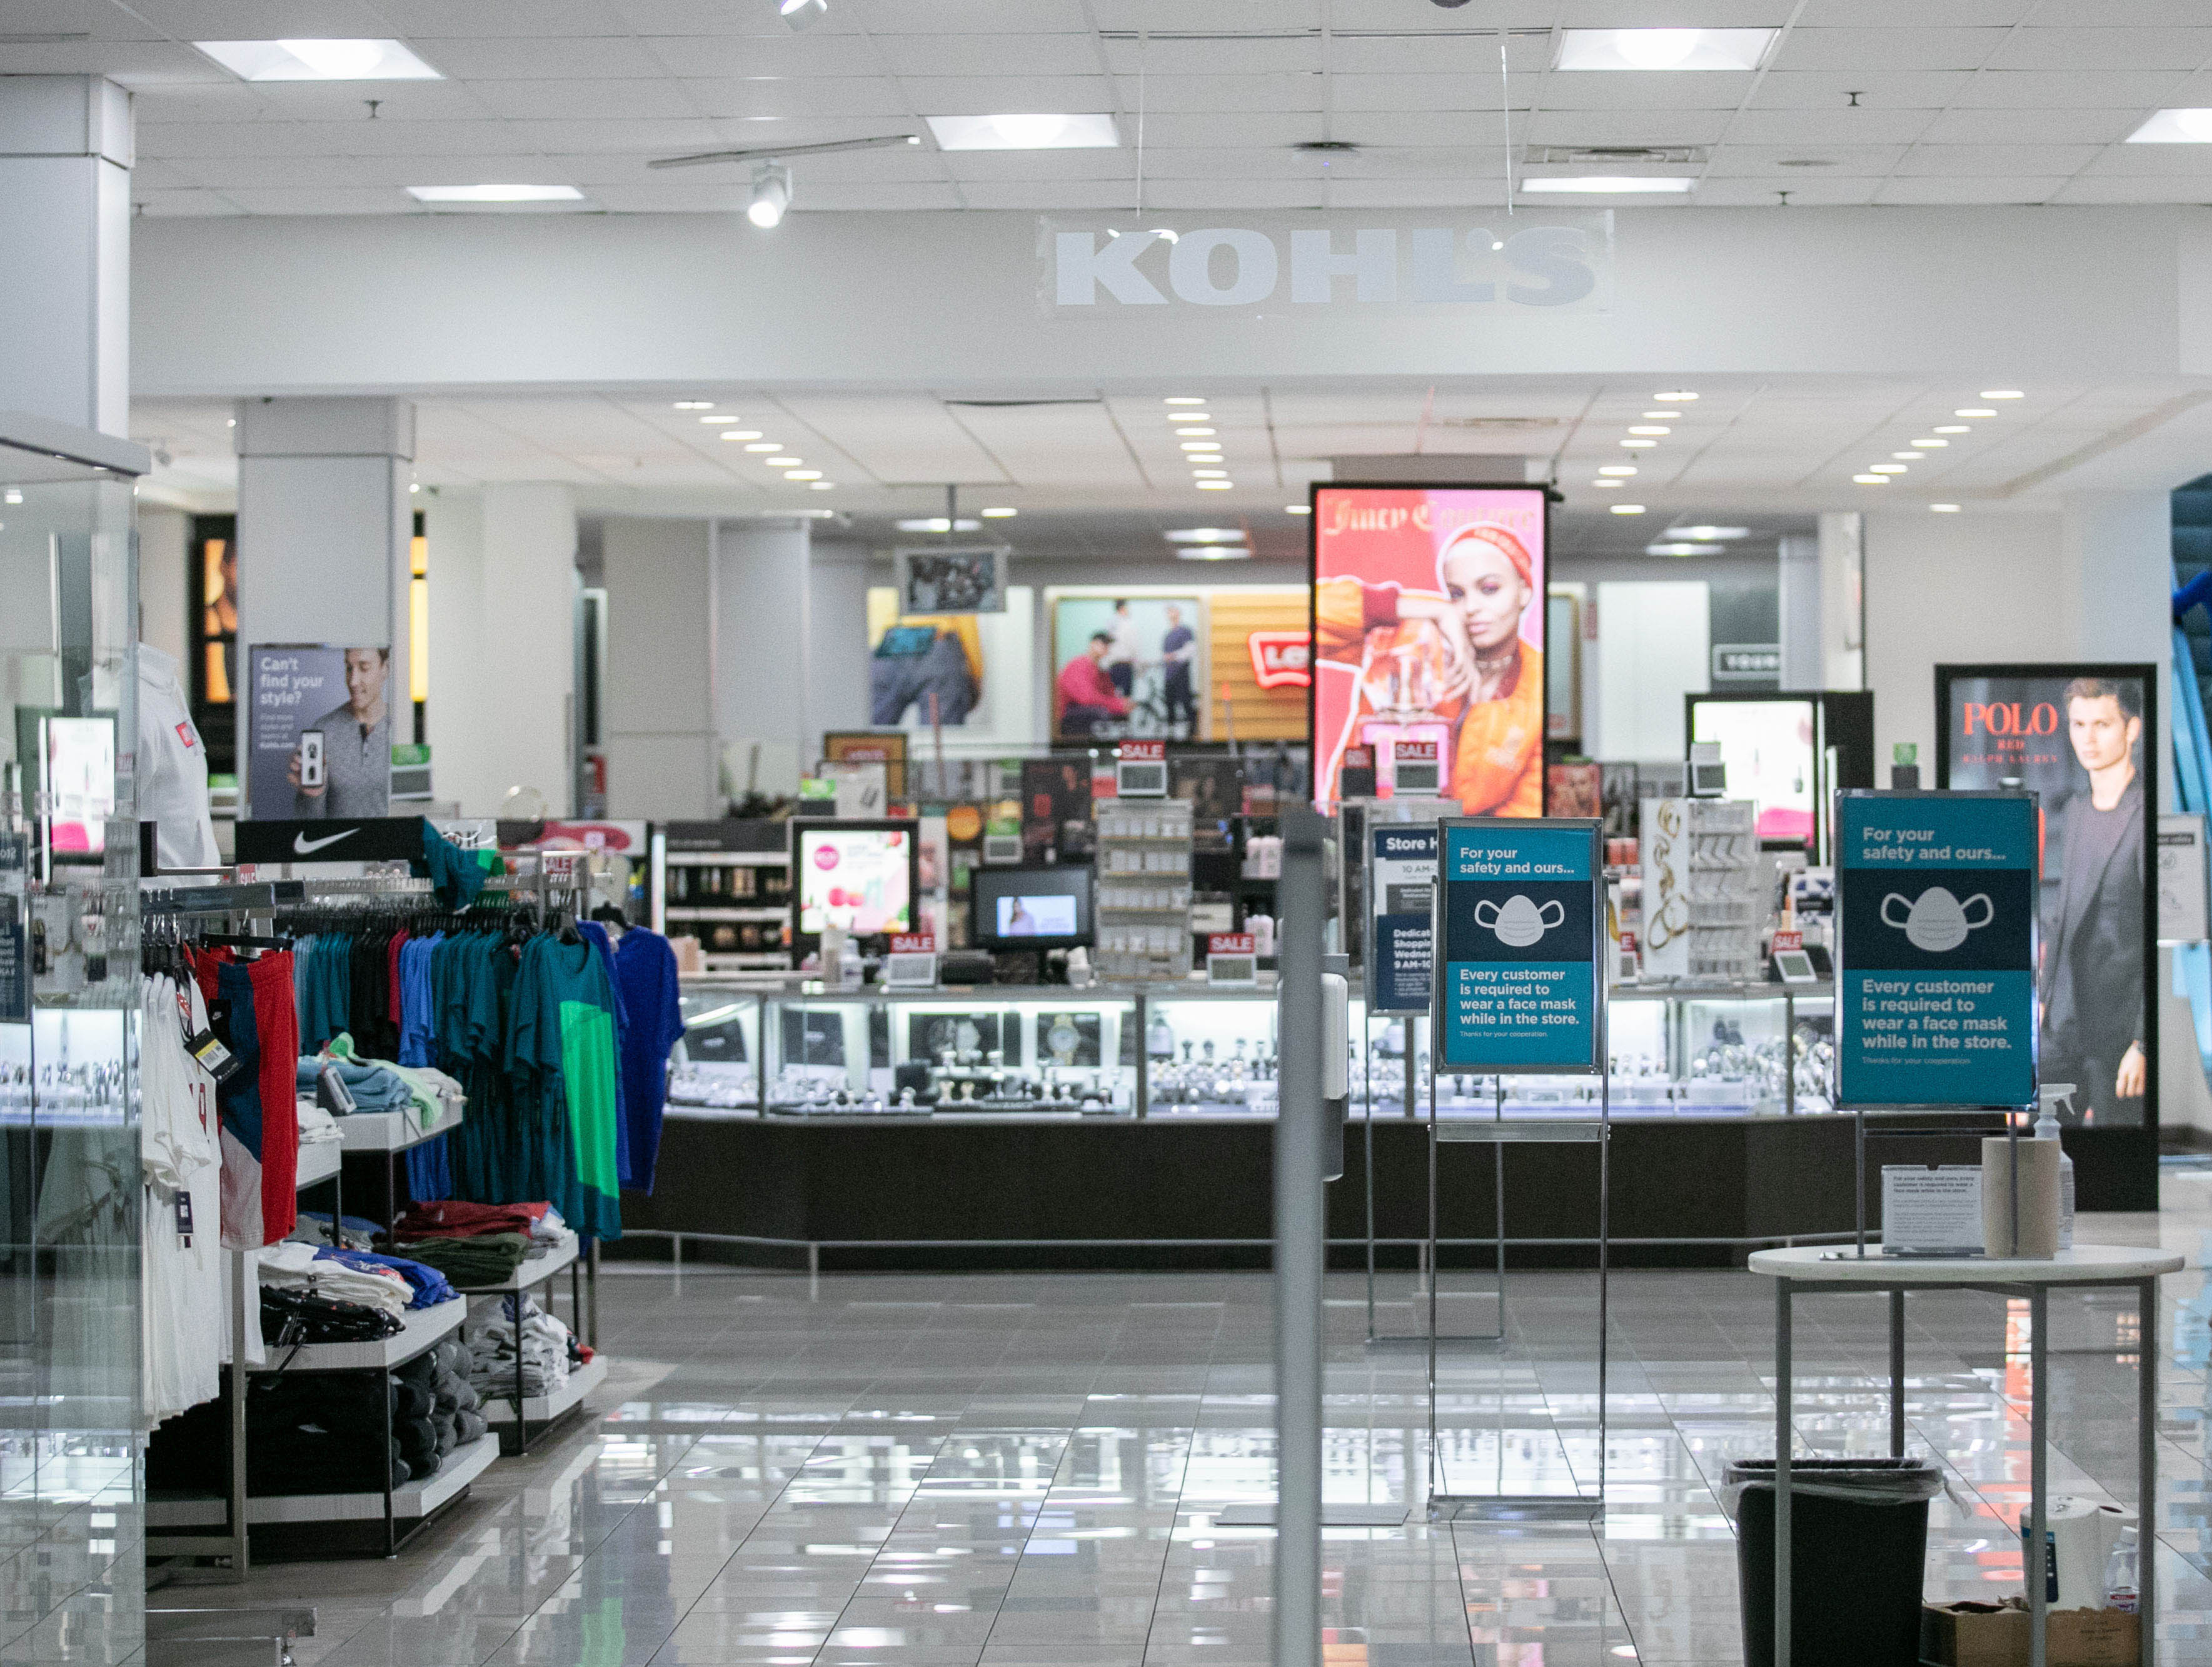 A Kohl's store in Jersey City, New Jersey, is pictured on August 16.